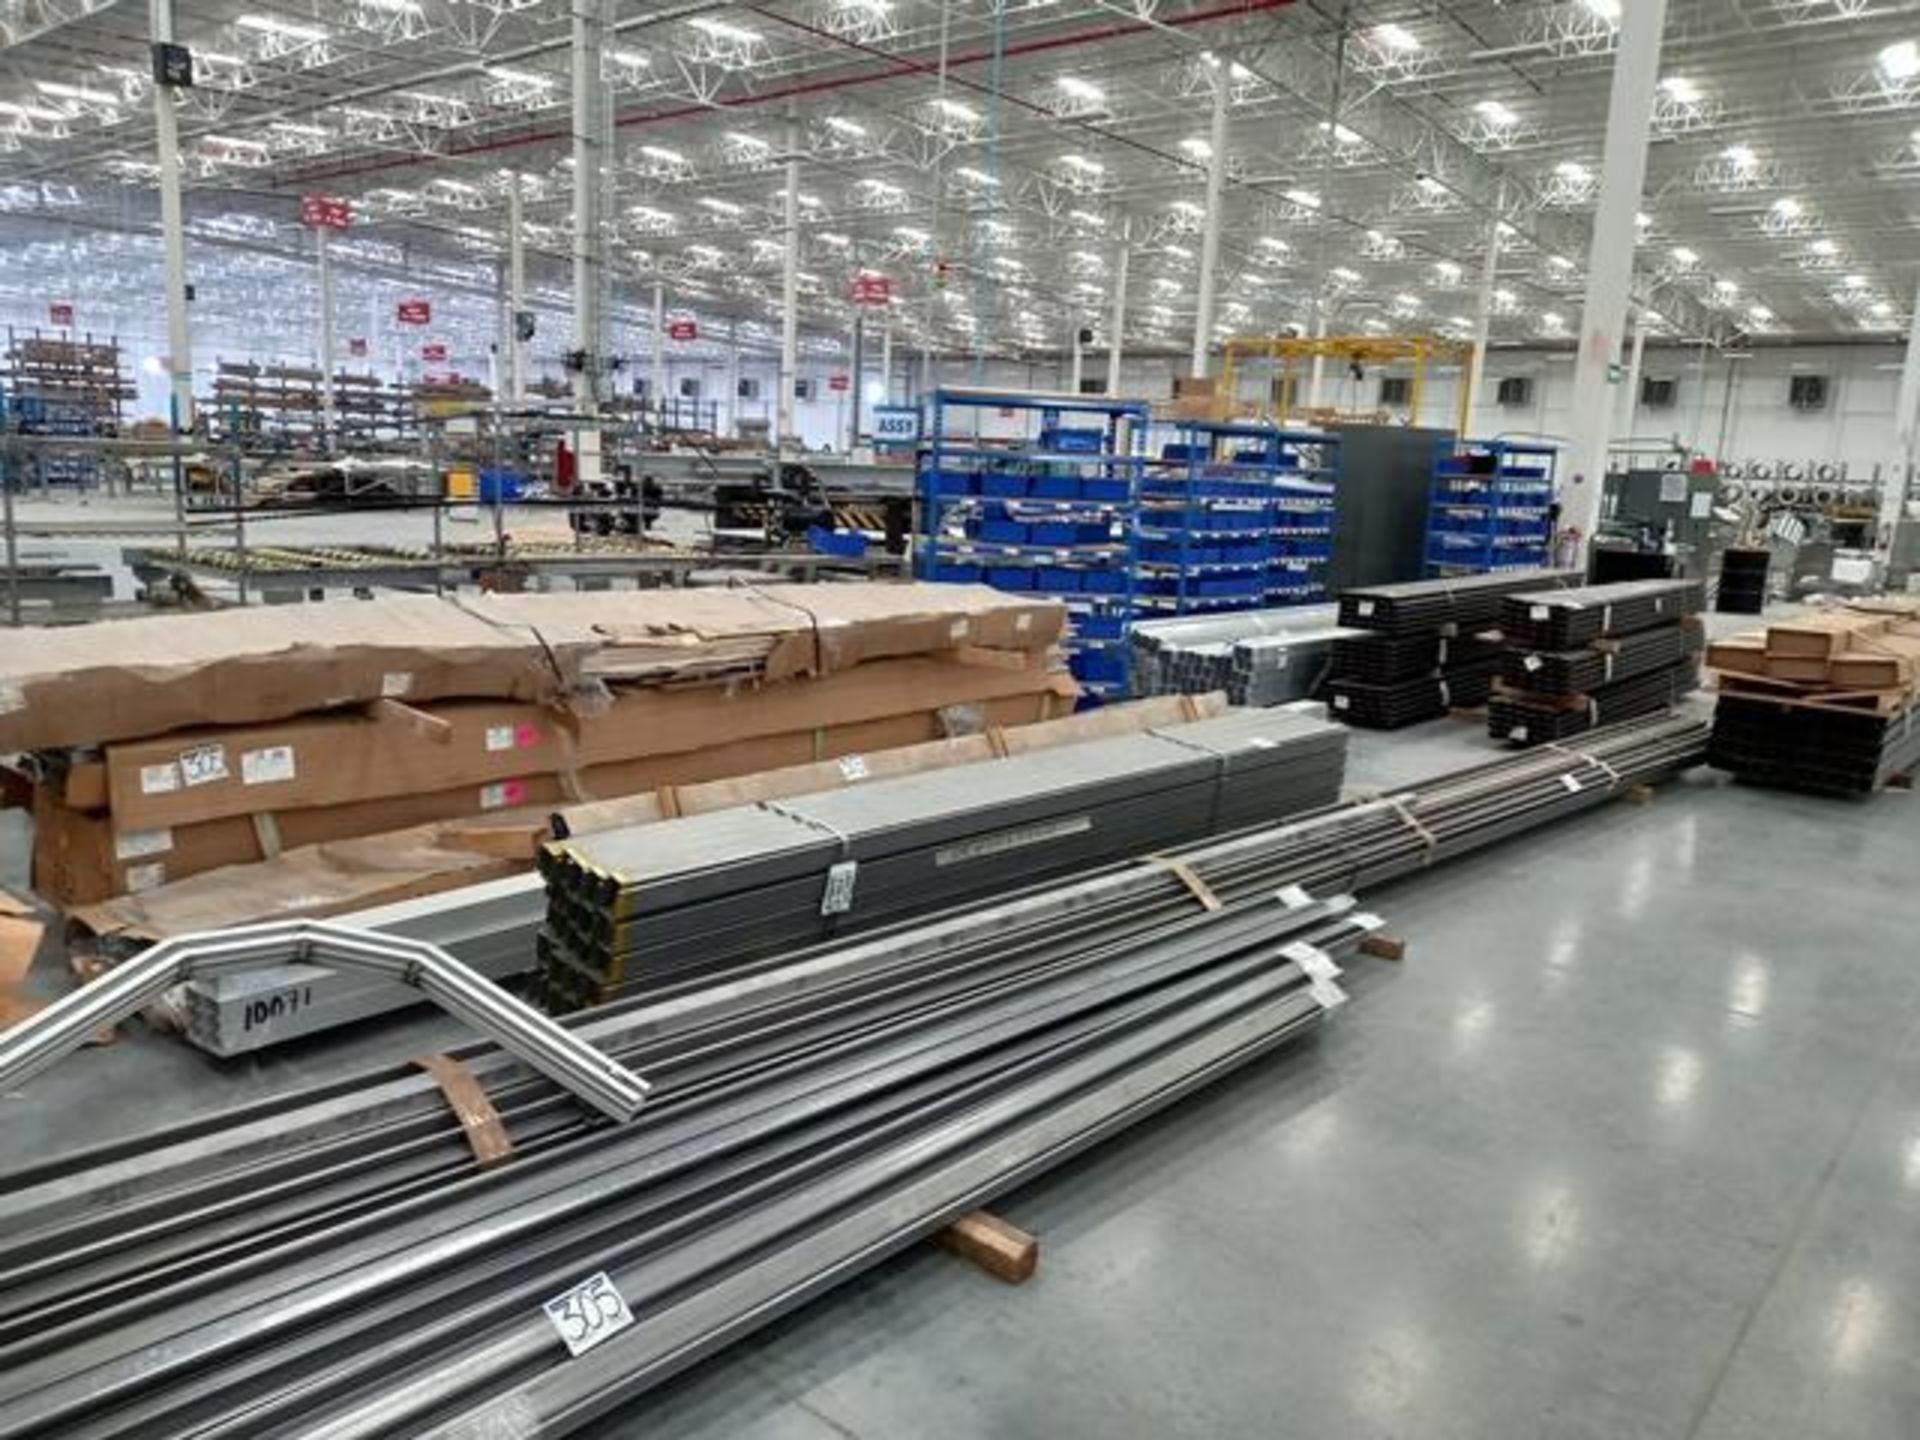 LOT: (30 approx.) Pallets, w/Aluminum Profile, Metal Canelta, Parts for Screens, Foam Boards, - Image 11 of 34